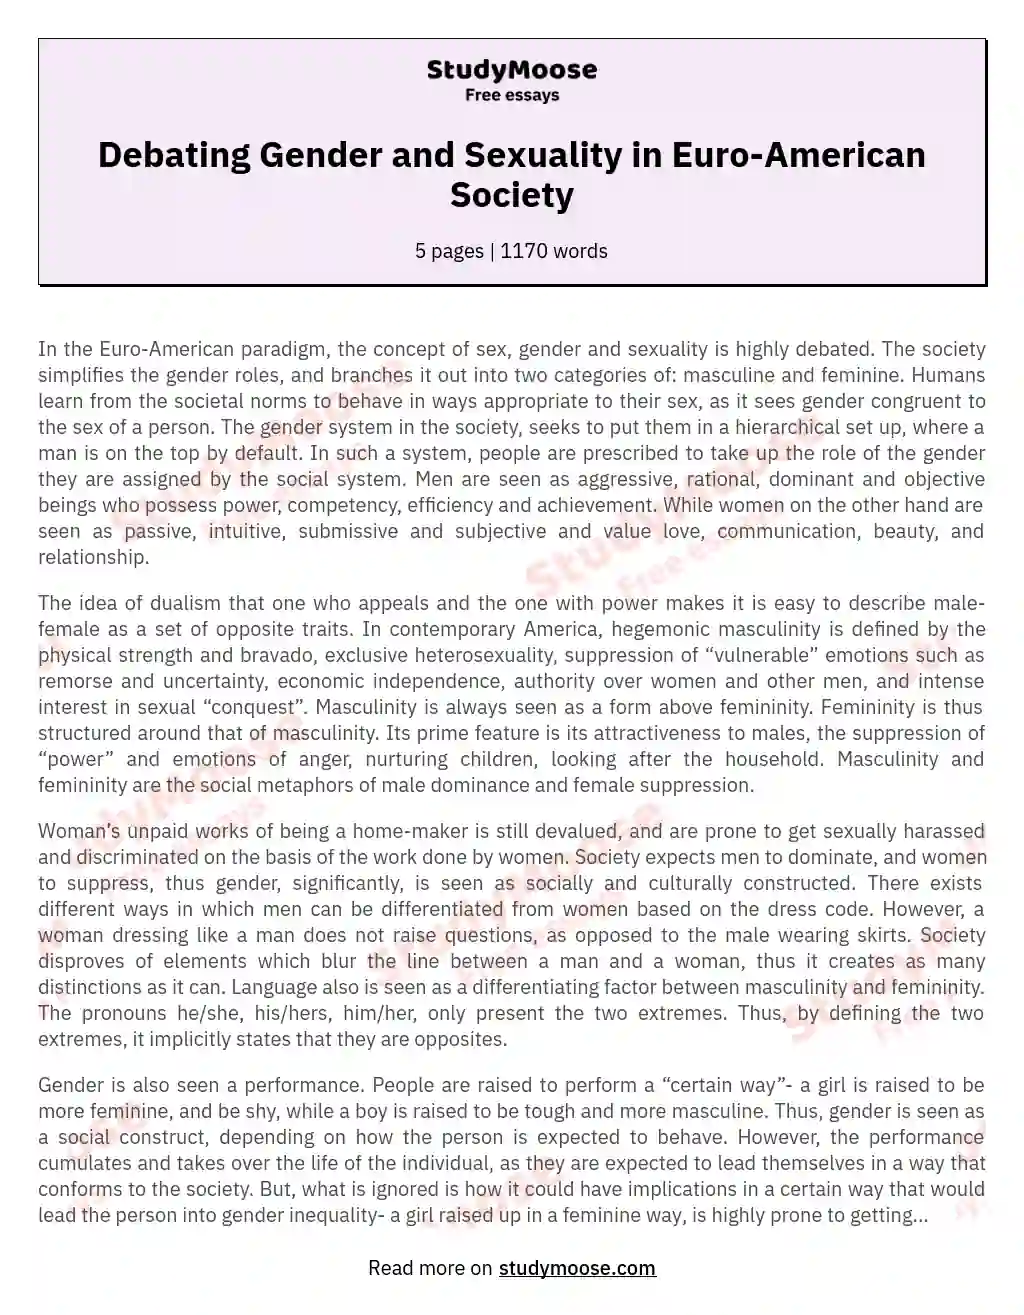 Debating Gender and Sexuality in Euro-American Society essay